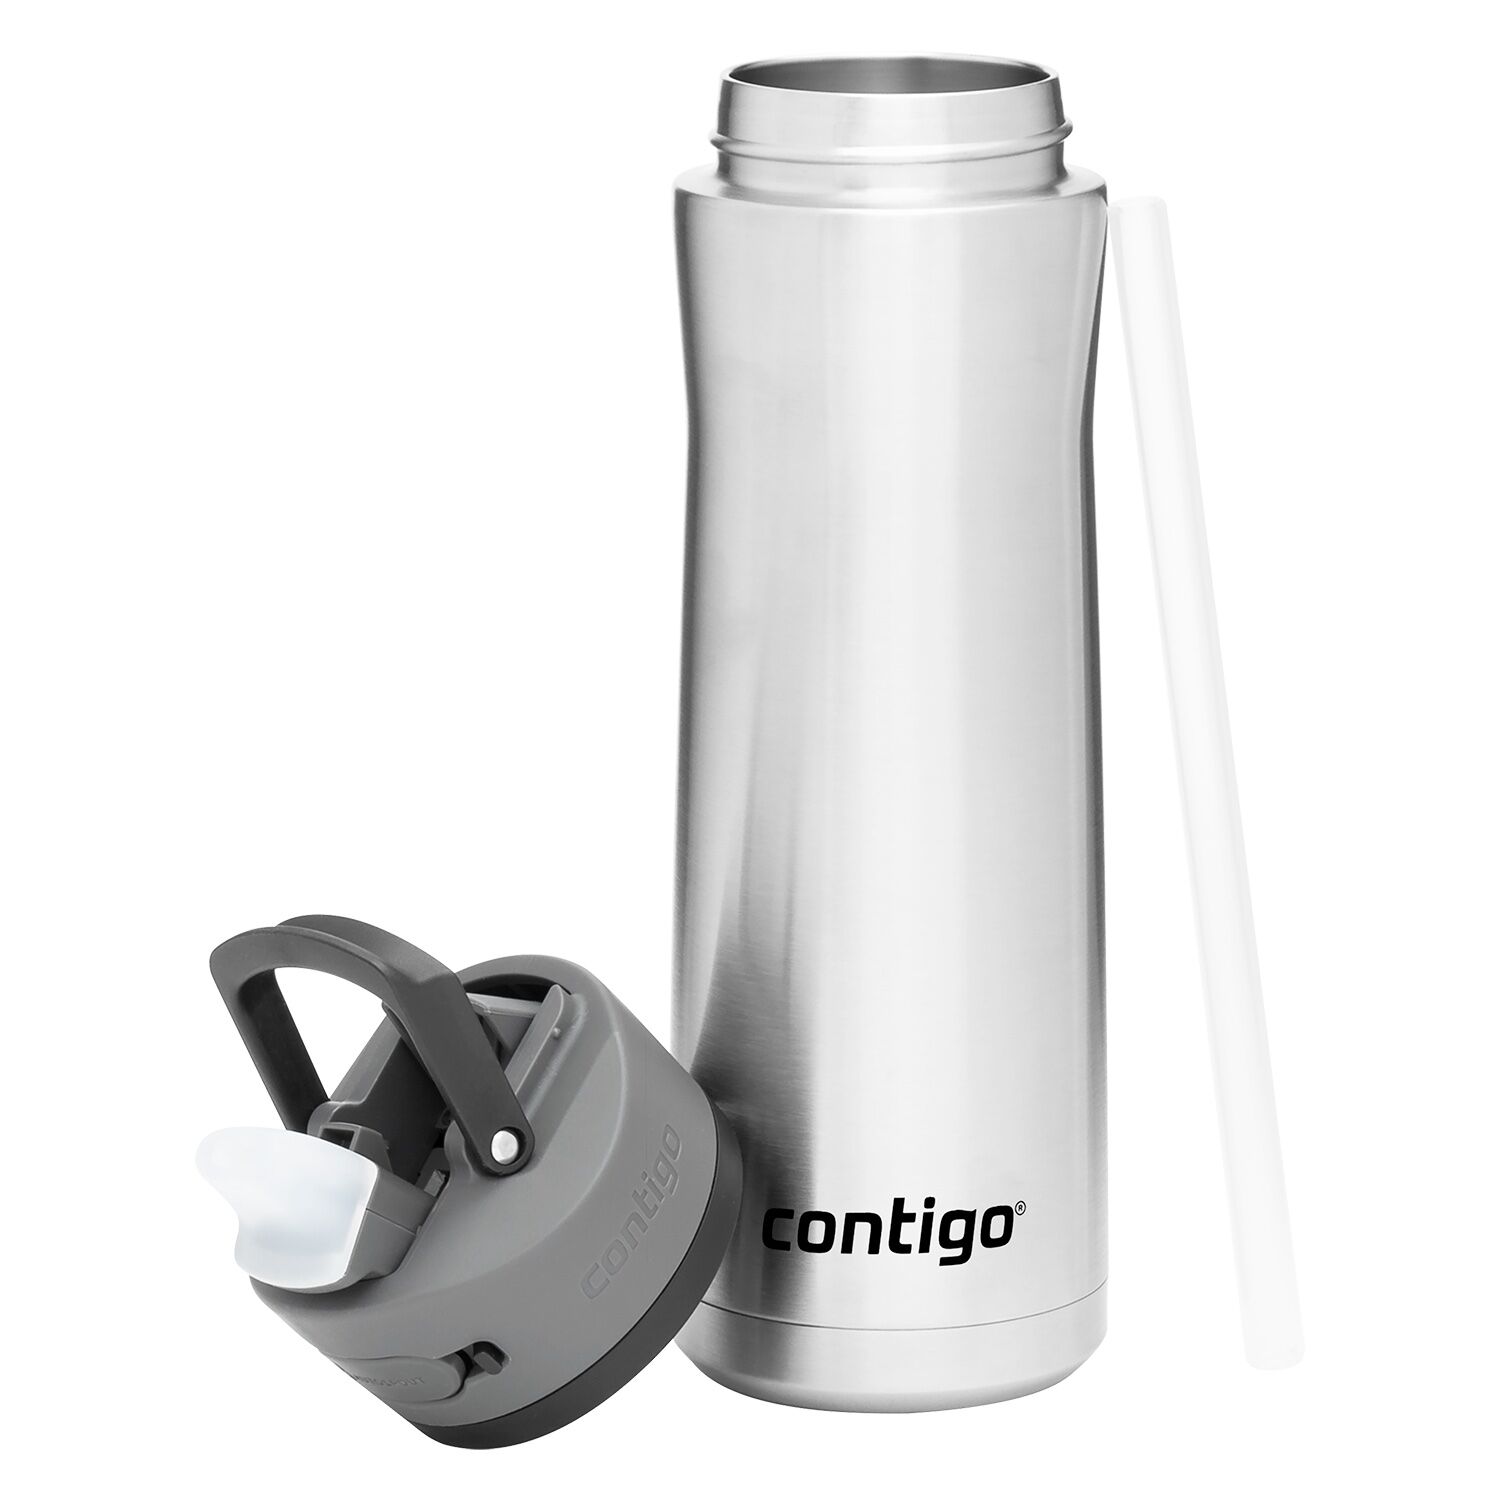 Personalized Laser Engraved Water Bottles Stainless 20 Oz Contigo